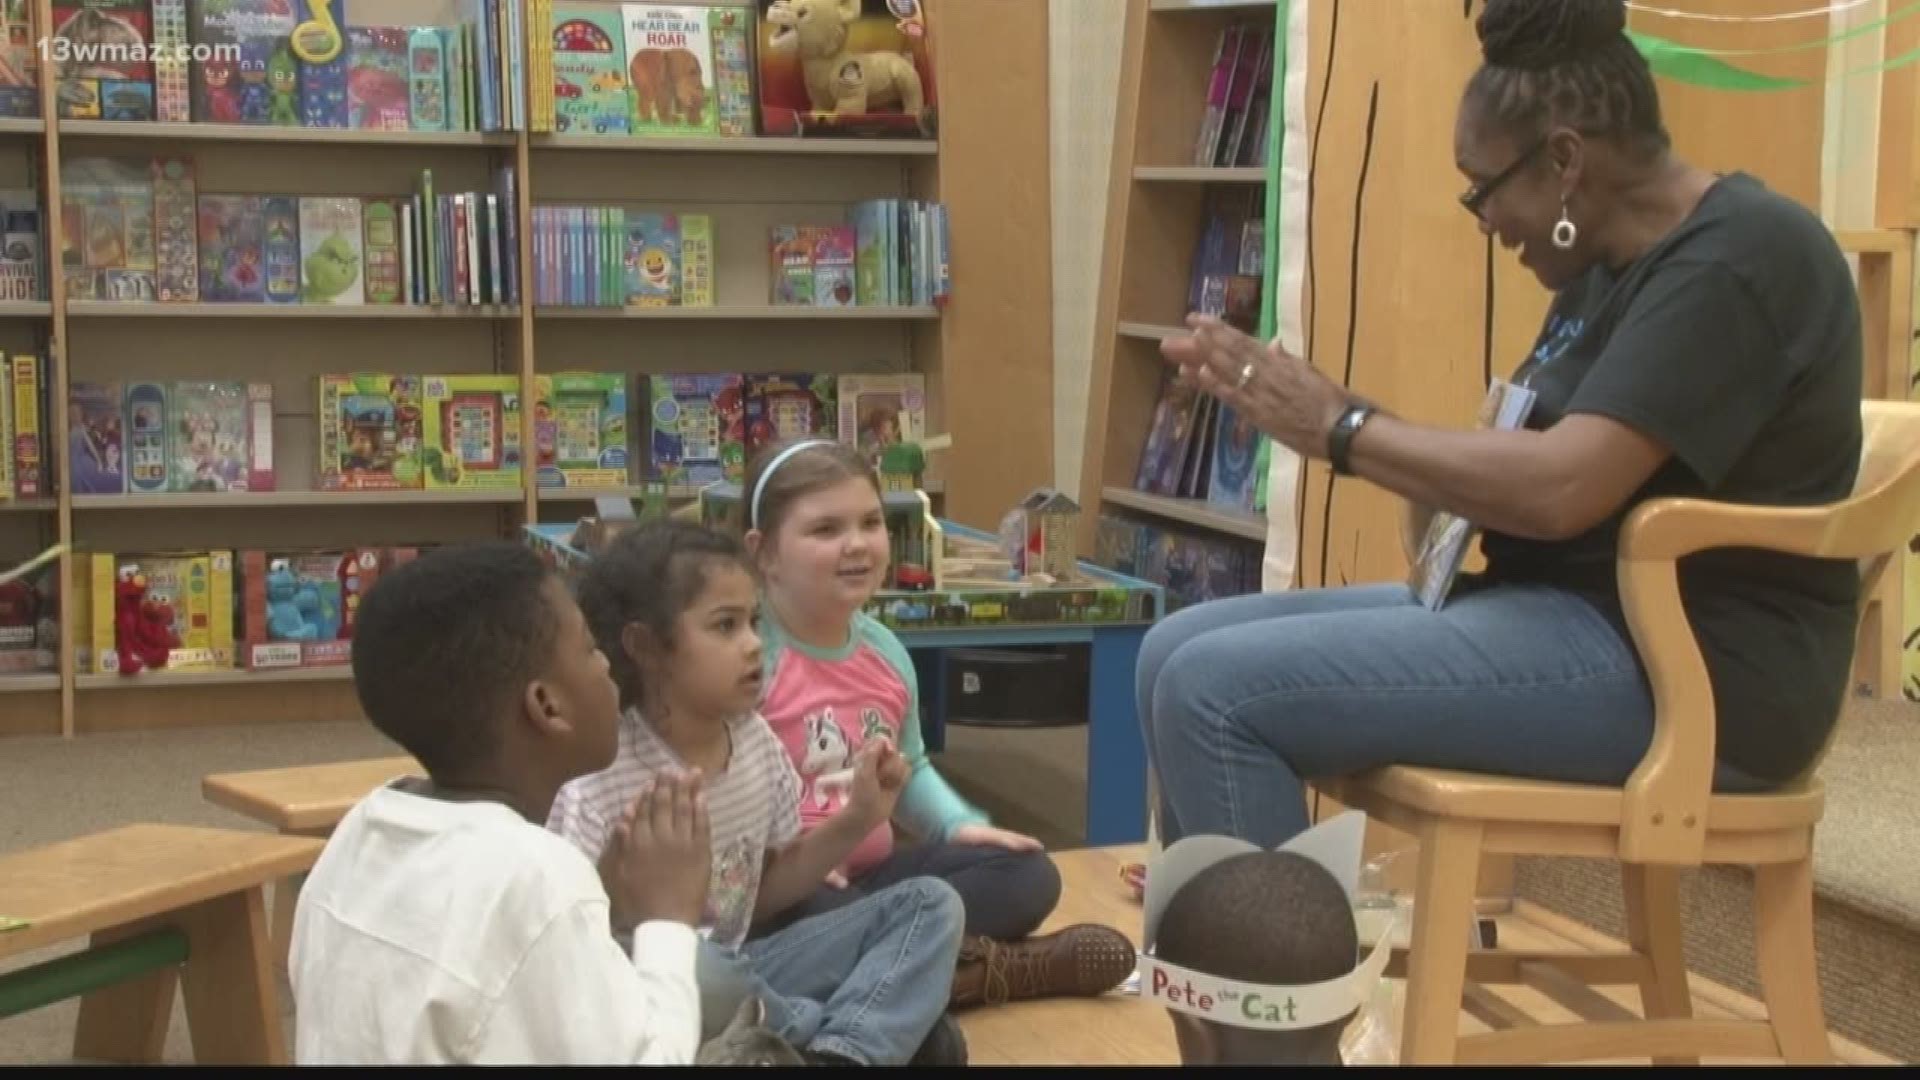 One Macon native came back home to share the gift of reading. Beatrice Brown read her newest book to kids at the Riverside Barnes and Noble.